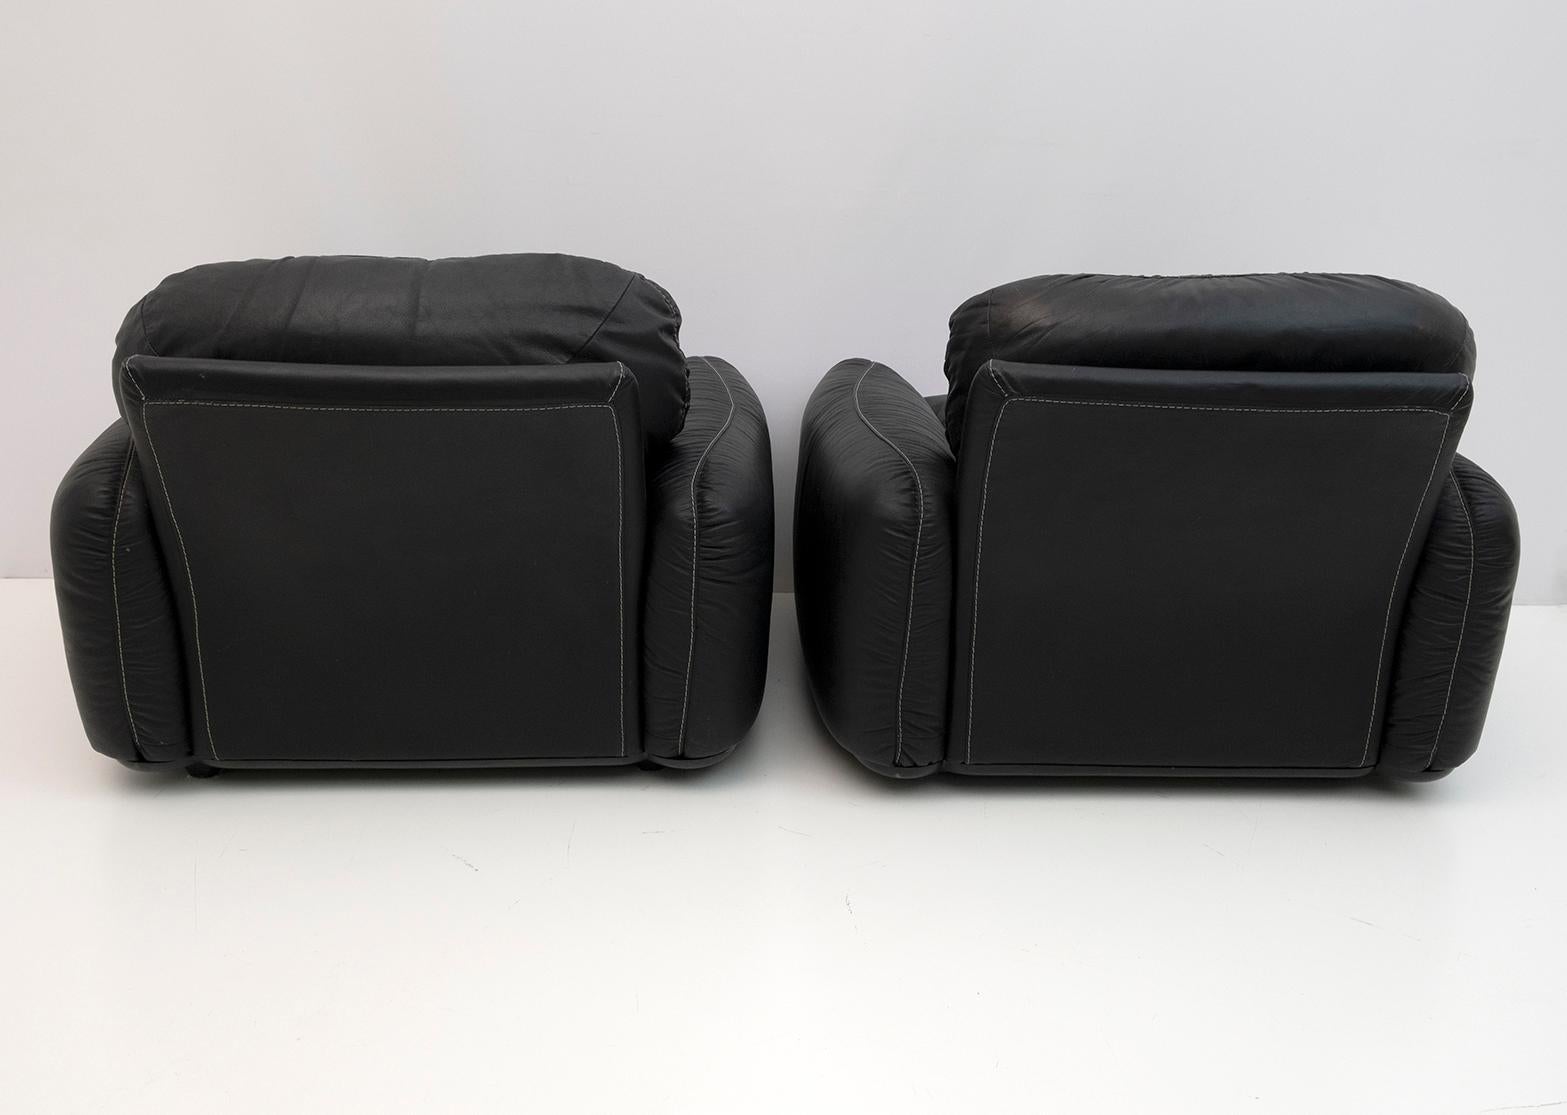 Mid-Century Modern Pair of Piumotto Italian Leather Armchairs by Arrigo Arrighi for Busnelli, 1970s For Sale